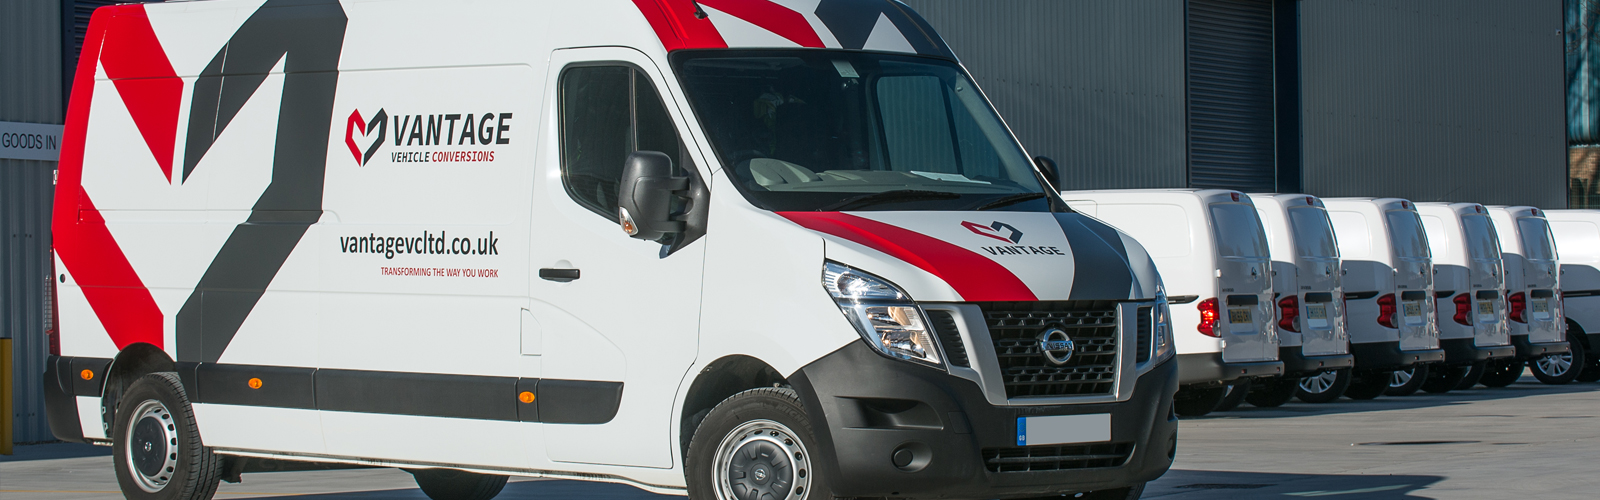 With over 10 years experience Vantage has unrivalled experience and expertise in commercial vehicle conversions, call 01952 680433 to discuss your project.